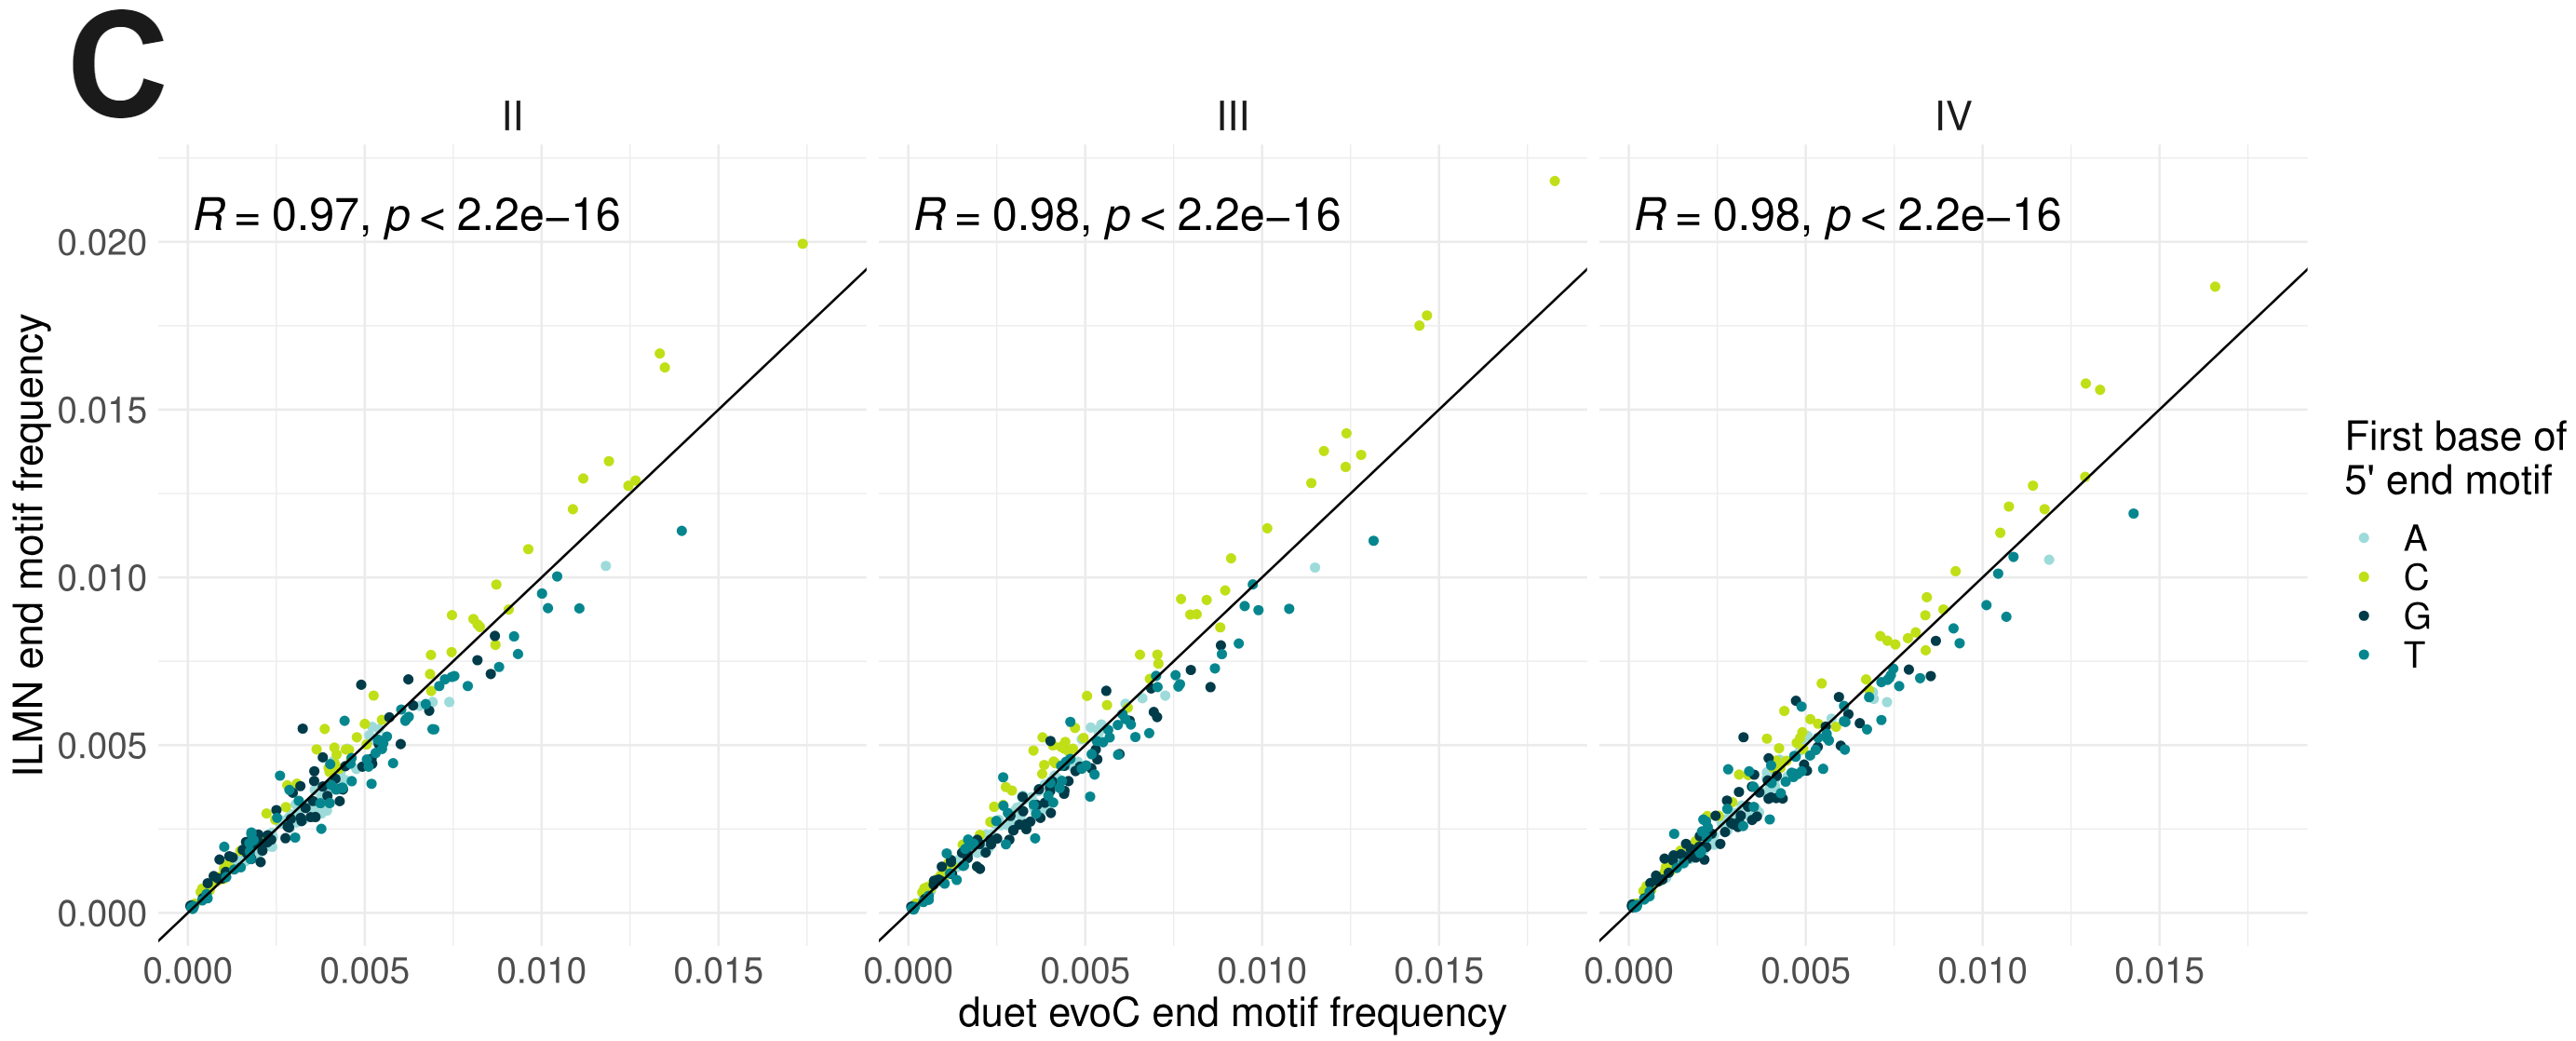 Correlation between end motif frequencies obtained from duet evoC and Illumina WGS.